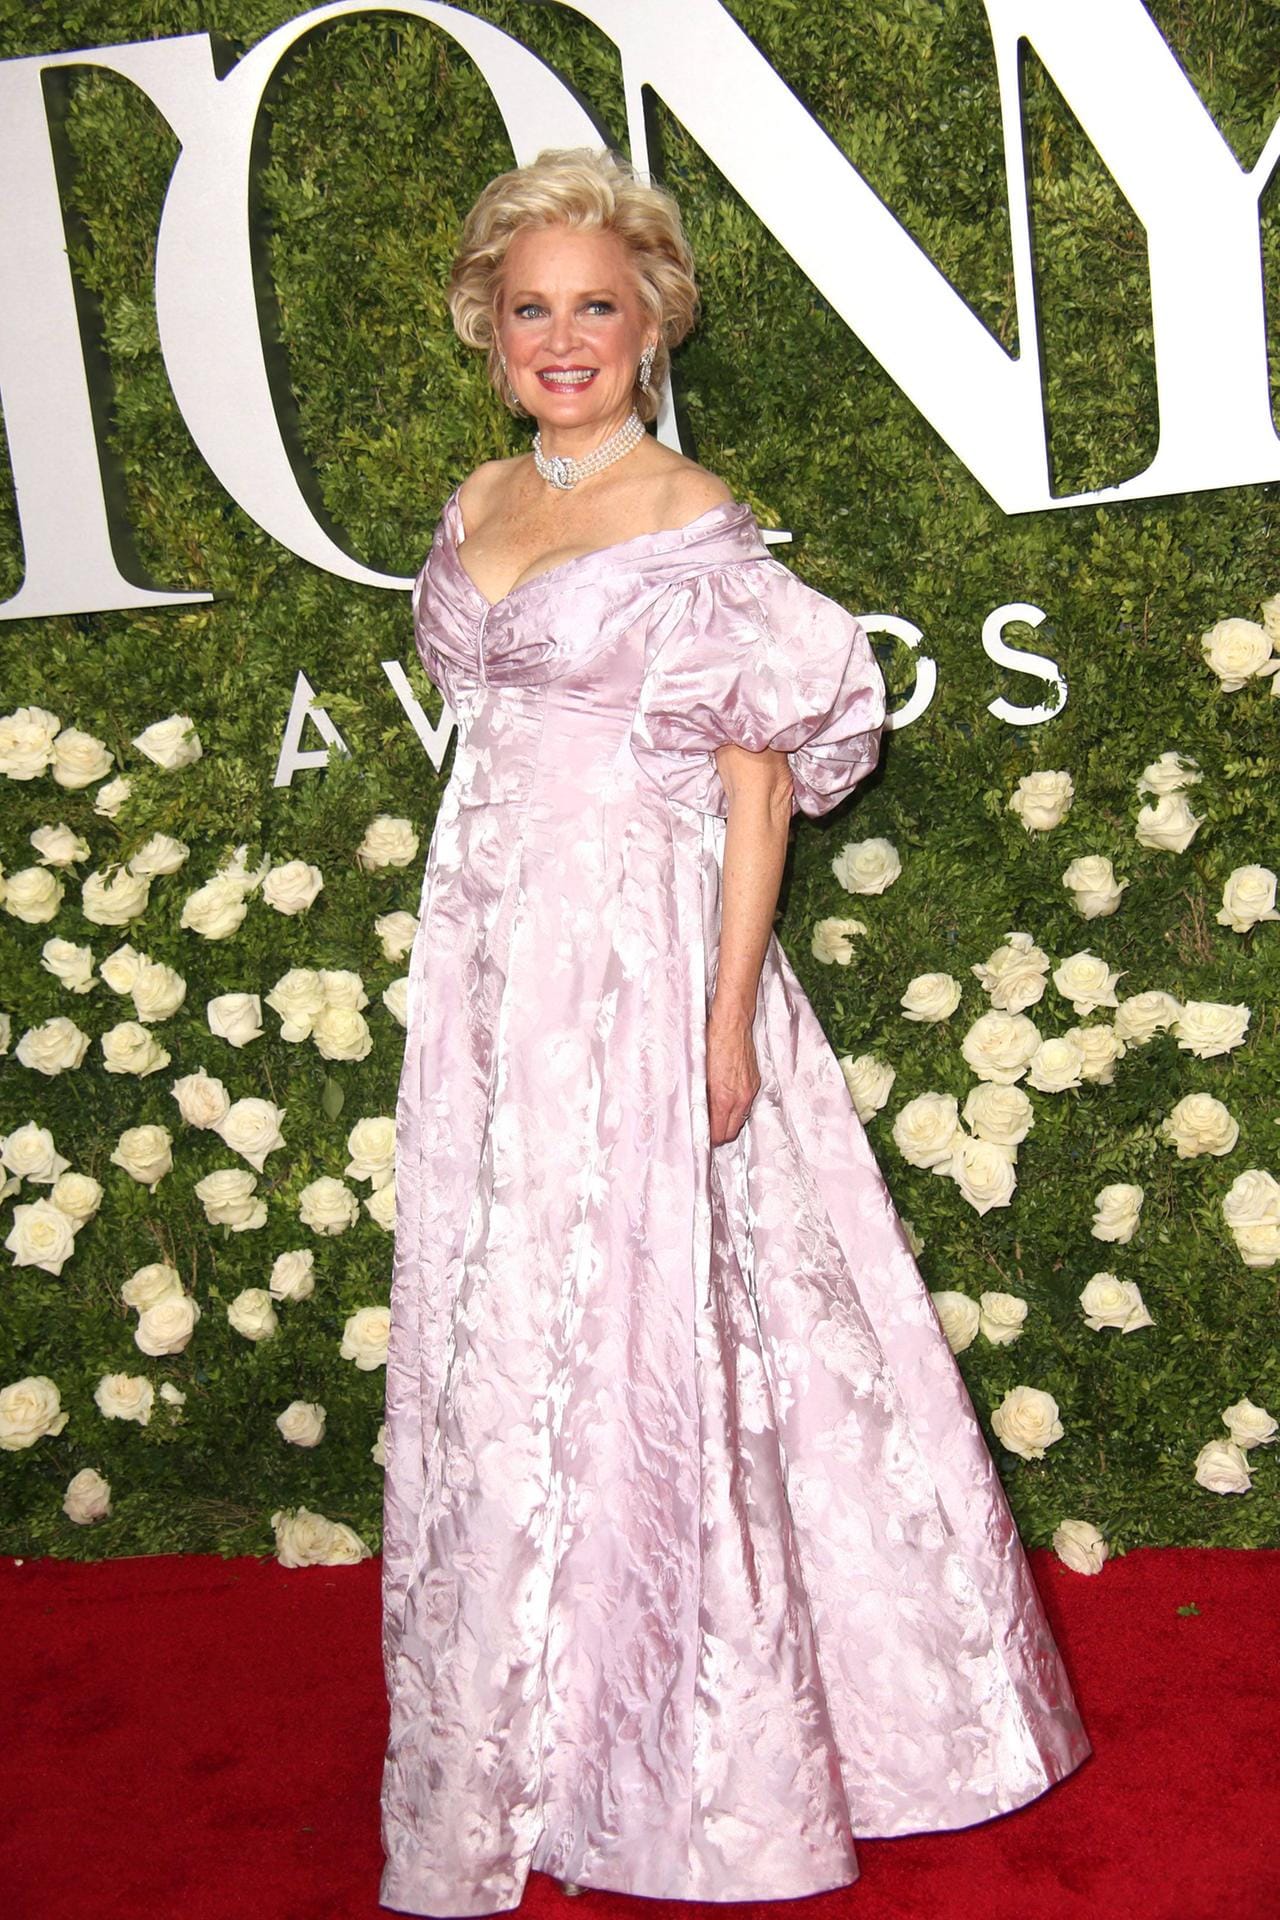 June 11 2017 New York N Y USA CHRISTINE EBERSOLE attends the 71st Annual Tony Awards Red Carp